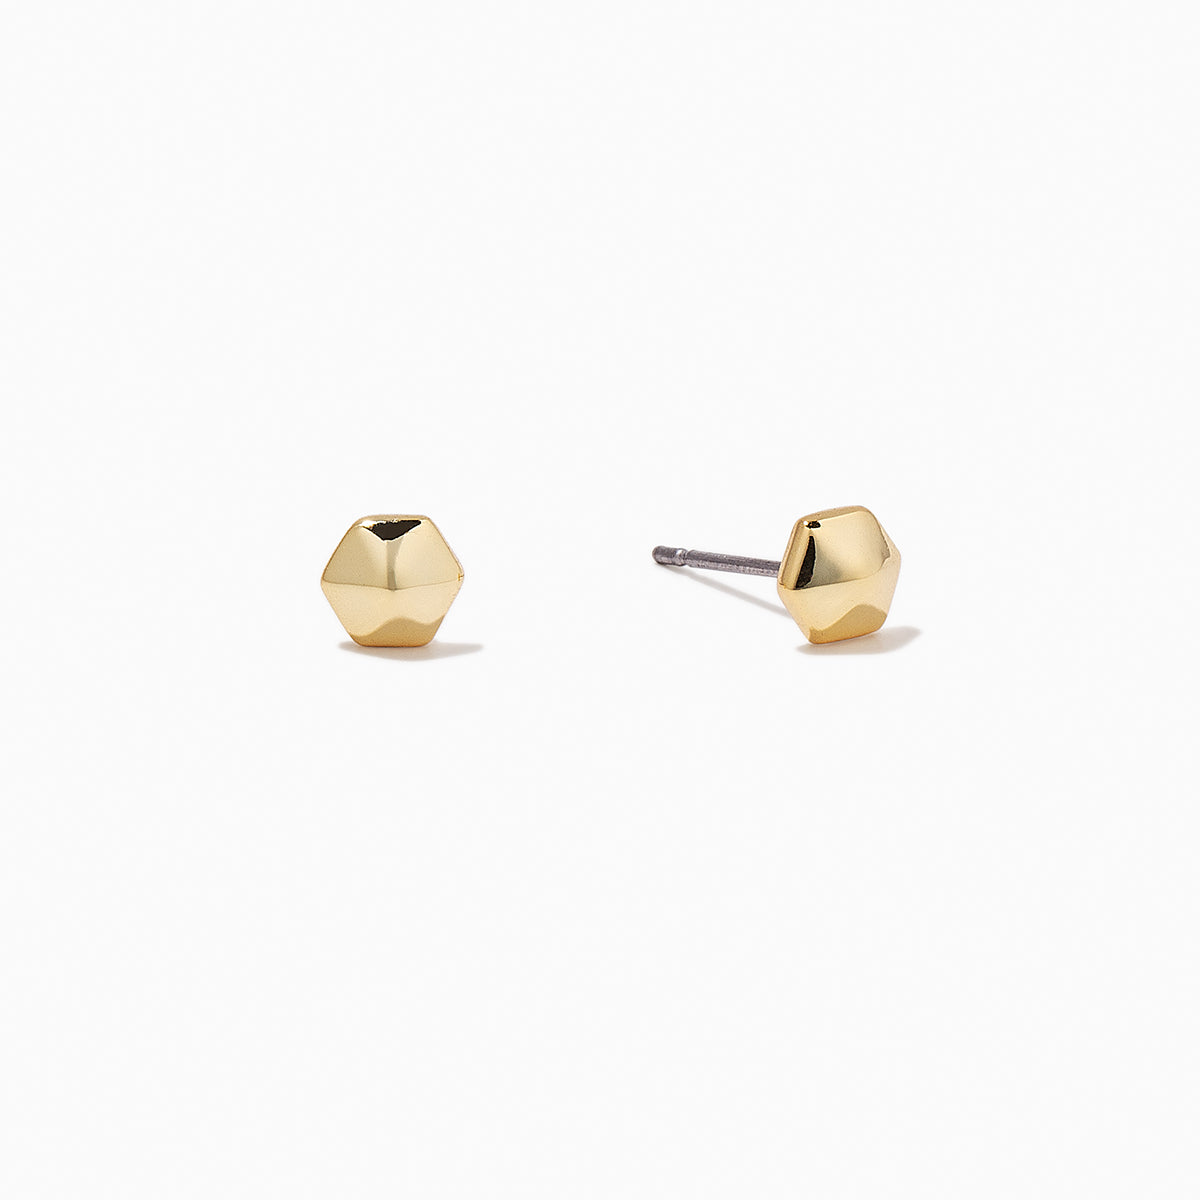 Pyramid Stud Earrings | Gold | Product Image | Uncommon James